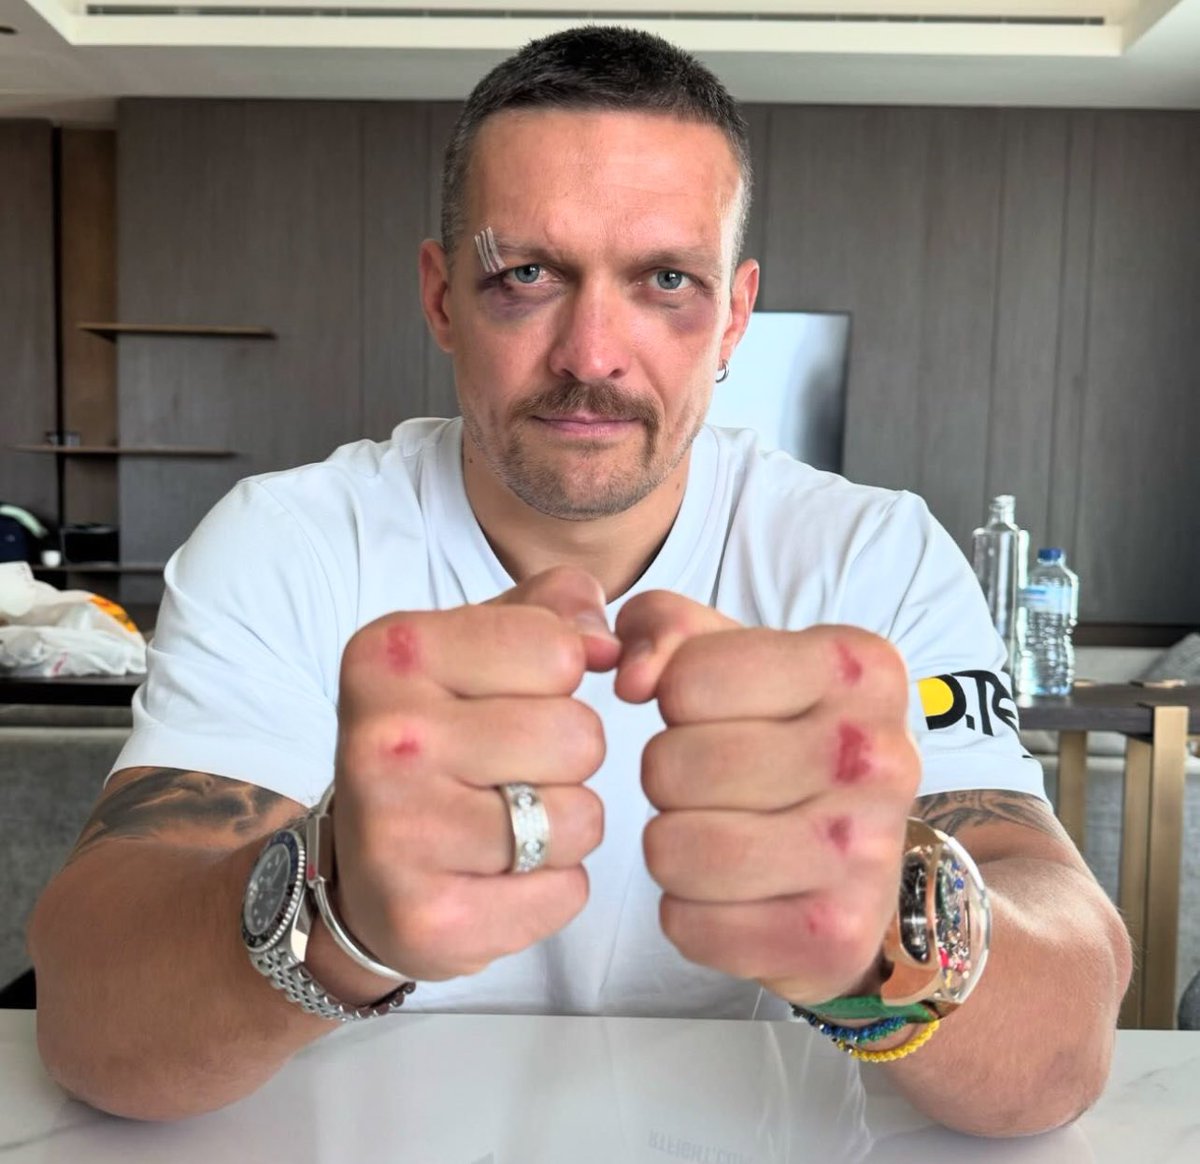 Battle scars of the undisputed king 👑 #FuryUsyk